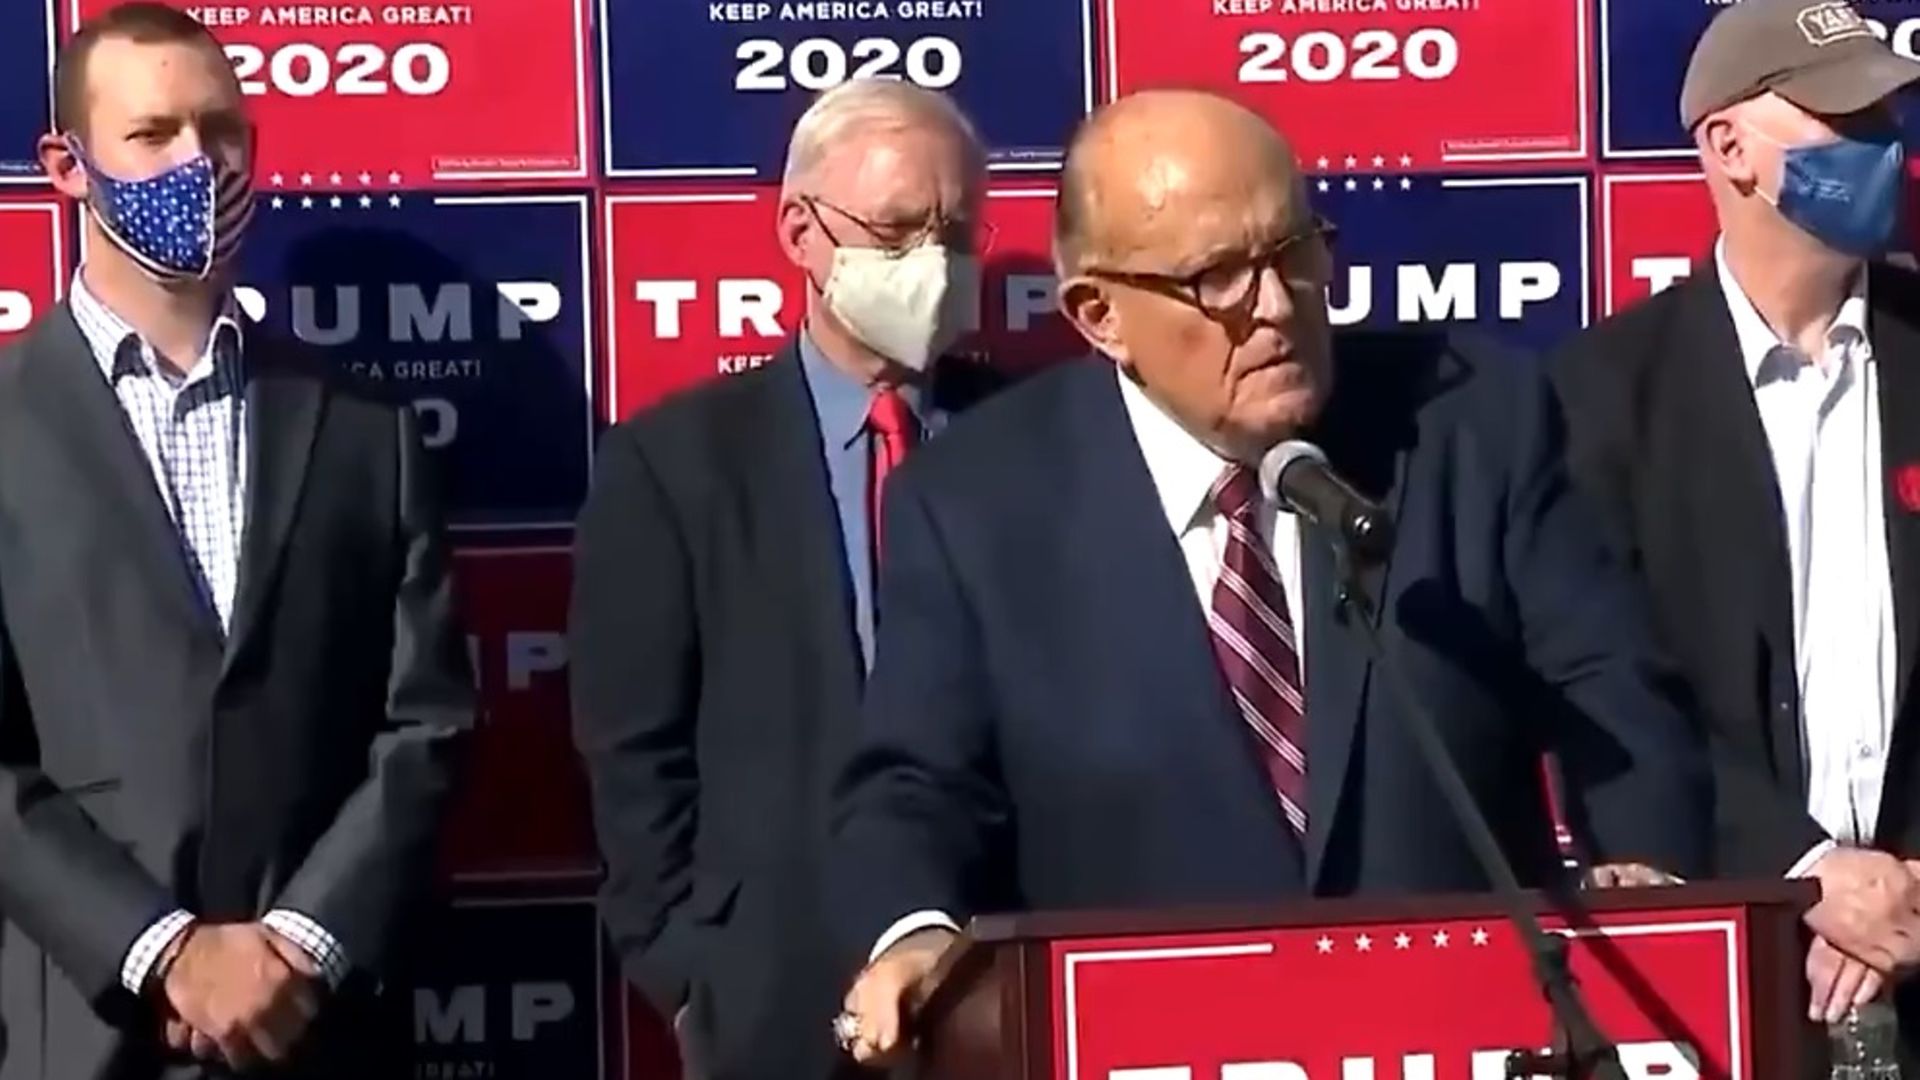 Rudy Giuliani addresses the media with the Trump legal team after news media named Democratic presidential nominee Joe Biden the winner in the 2020 US presidential election - Credit: Twitter